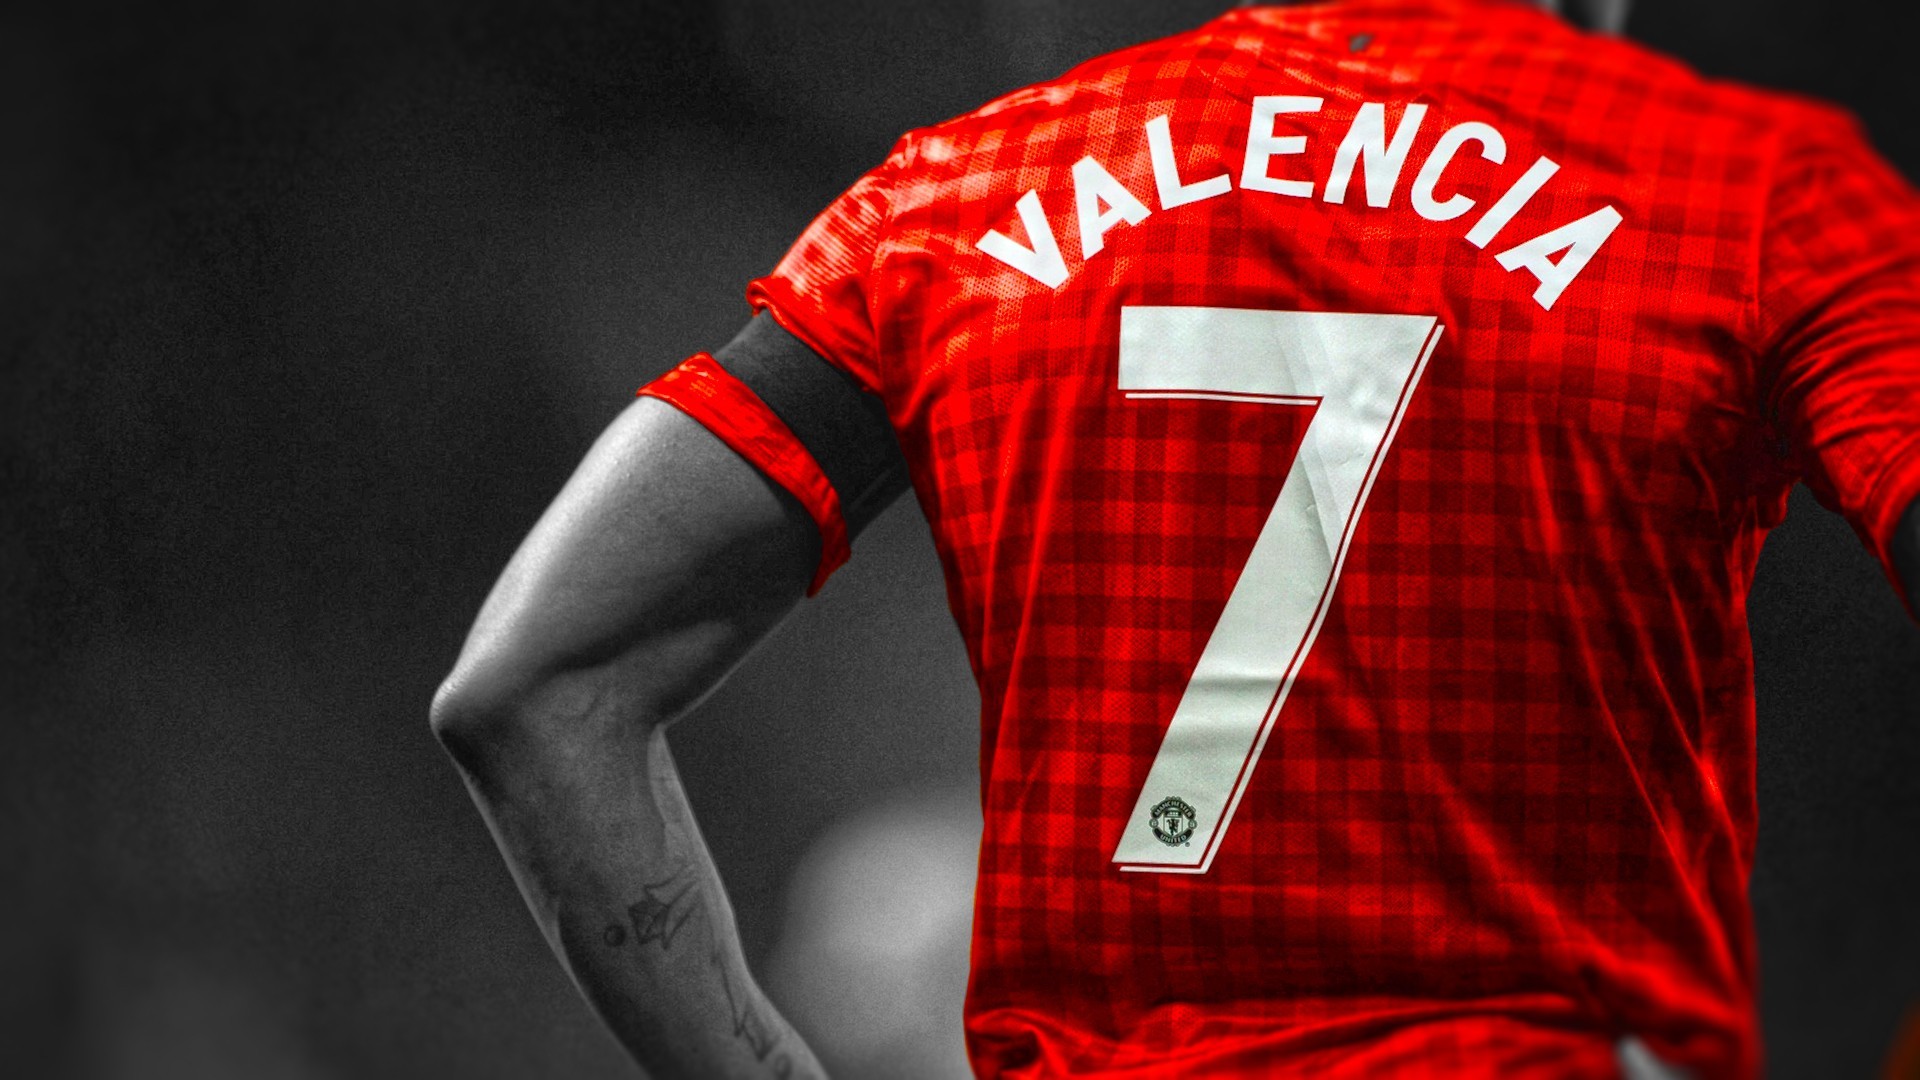 Wallpaper, men, black, T shirt, sportswear, red, selective coloring, brand, clothing, Manchester United, Antonio Valencia, muscle, 1920x1080 px, football player, sleeve 1920x1080